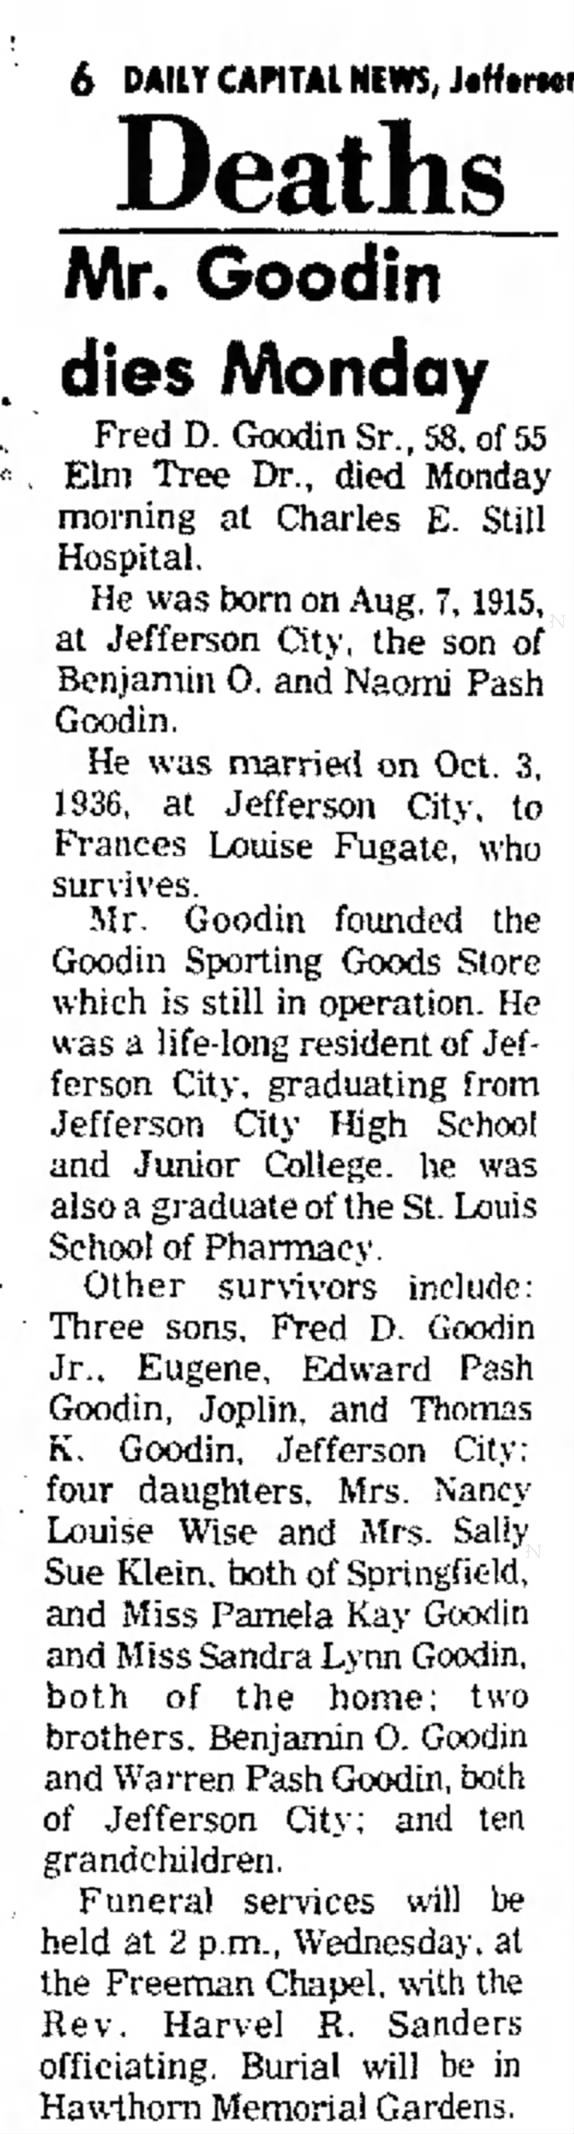 Frederick Dudley "Fred" Goodin obituary